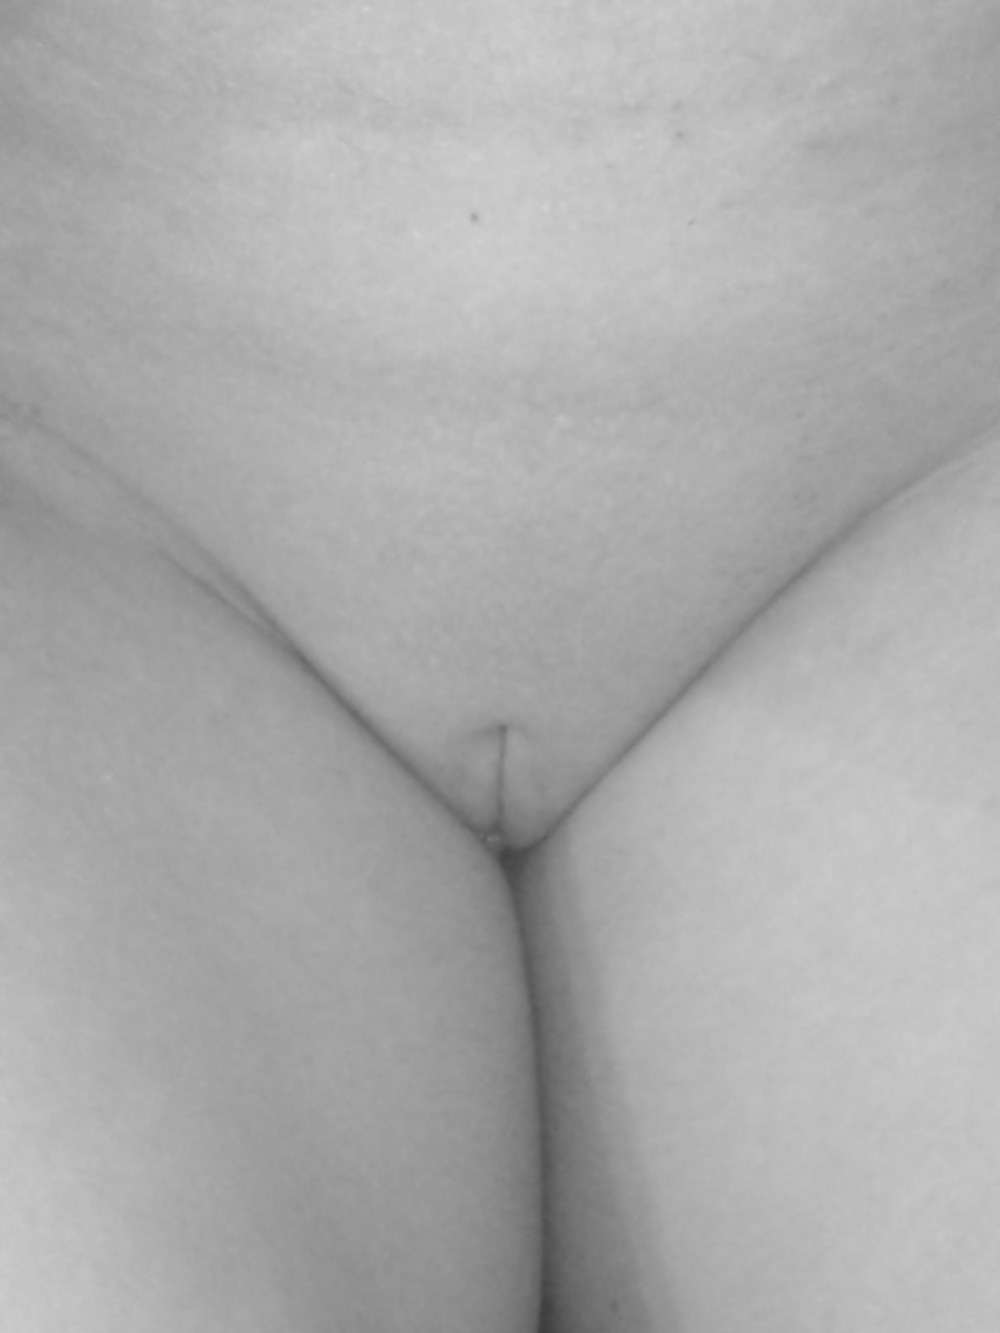 Black and white pussy closeups #4875343